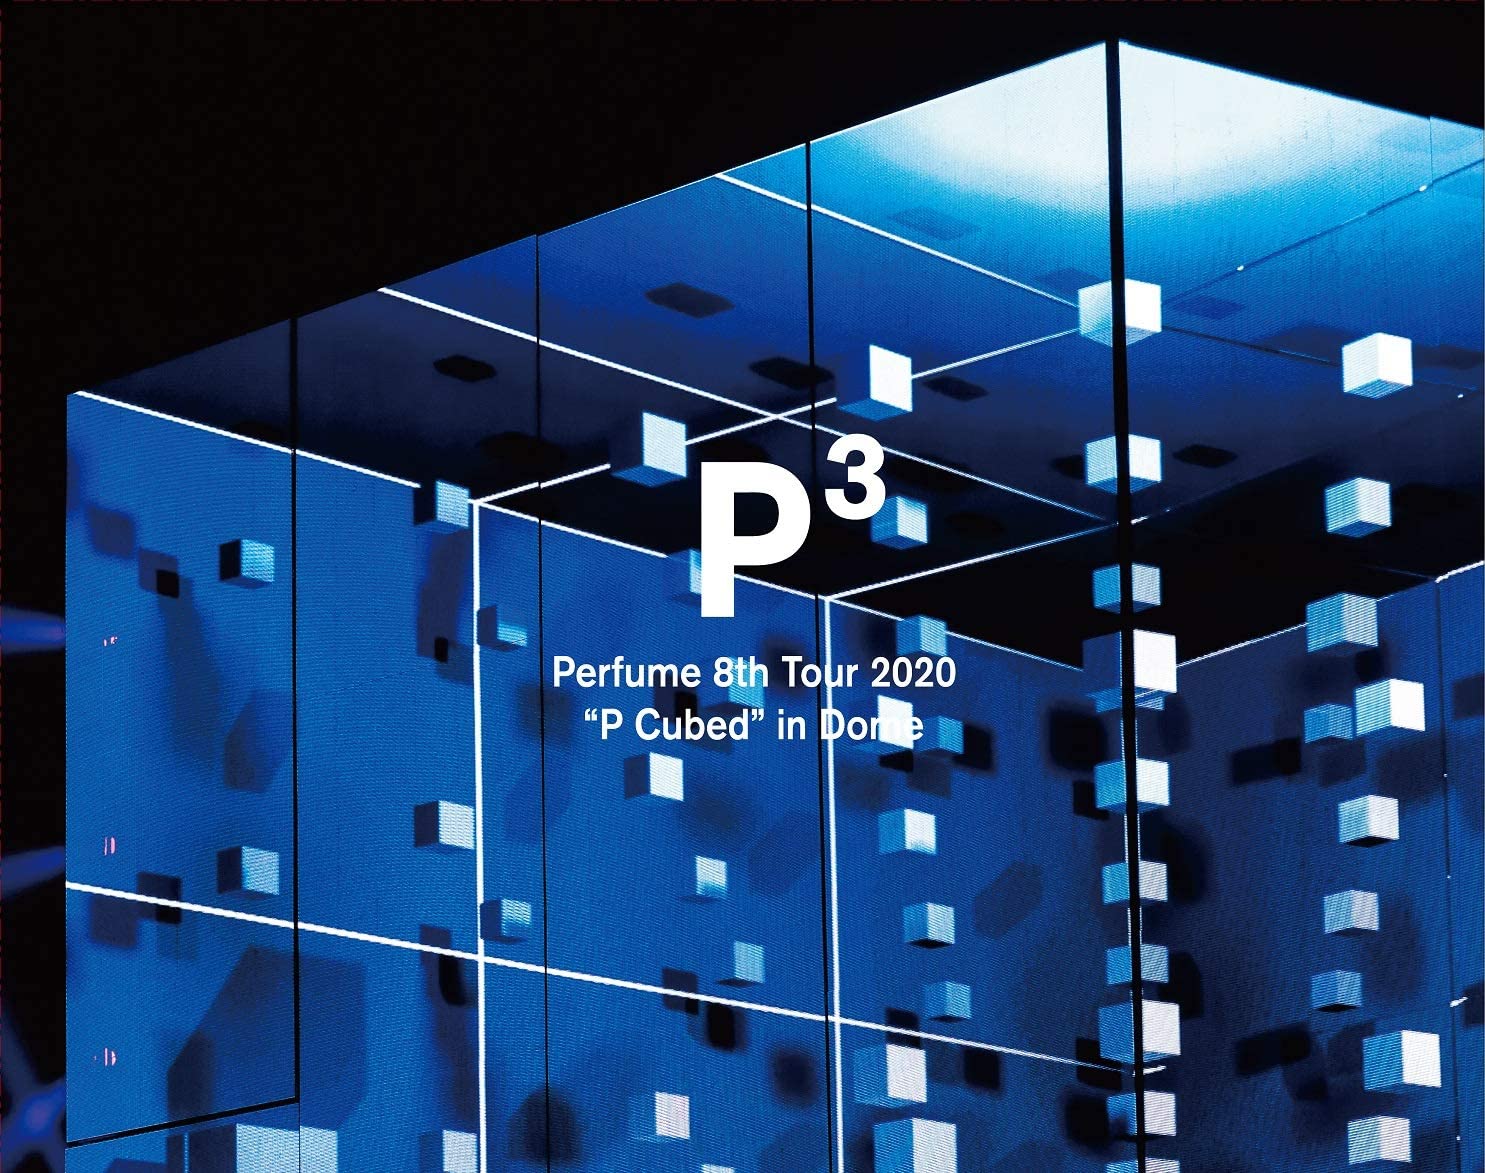 Perfume – Perfume 8th Tour 2020 “P Cubed” in Dome (2020) [Blu-ray ISO + MP4 1080p]